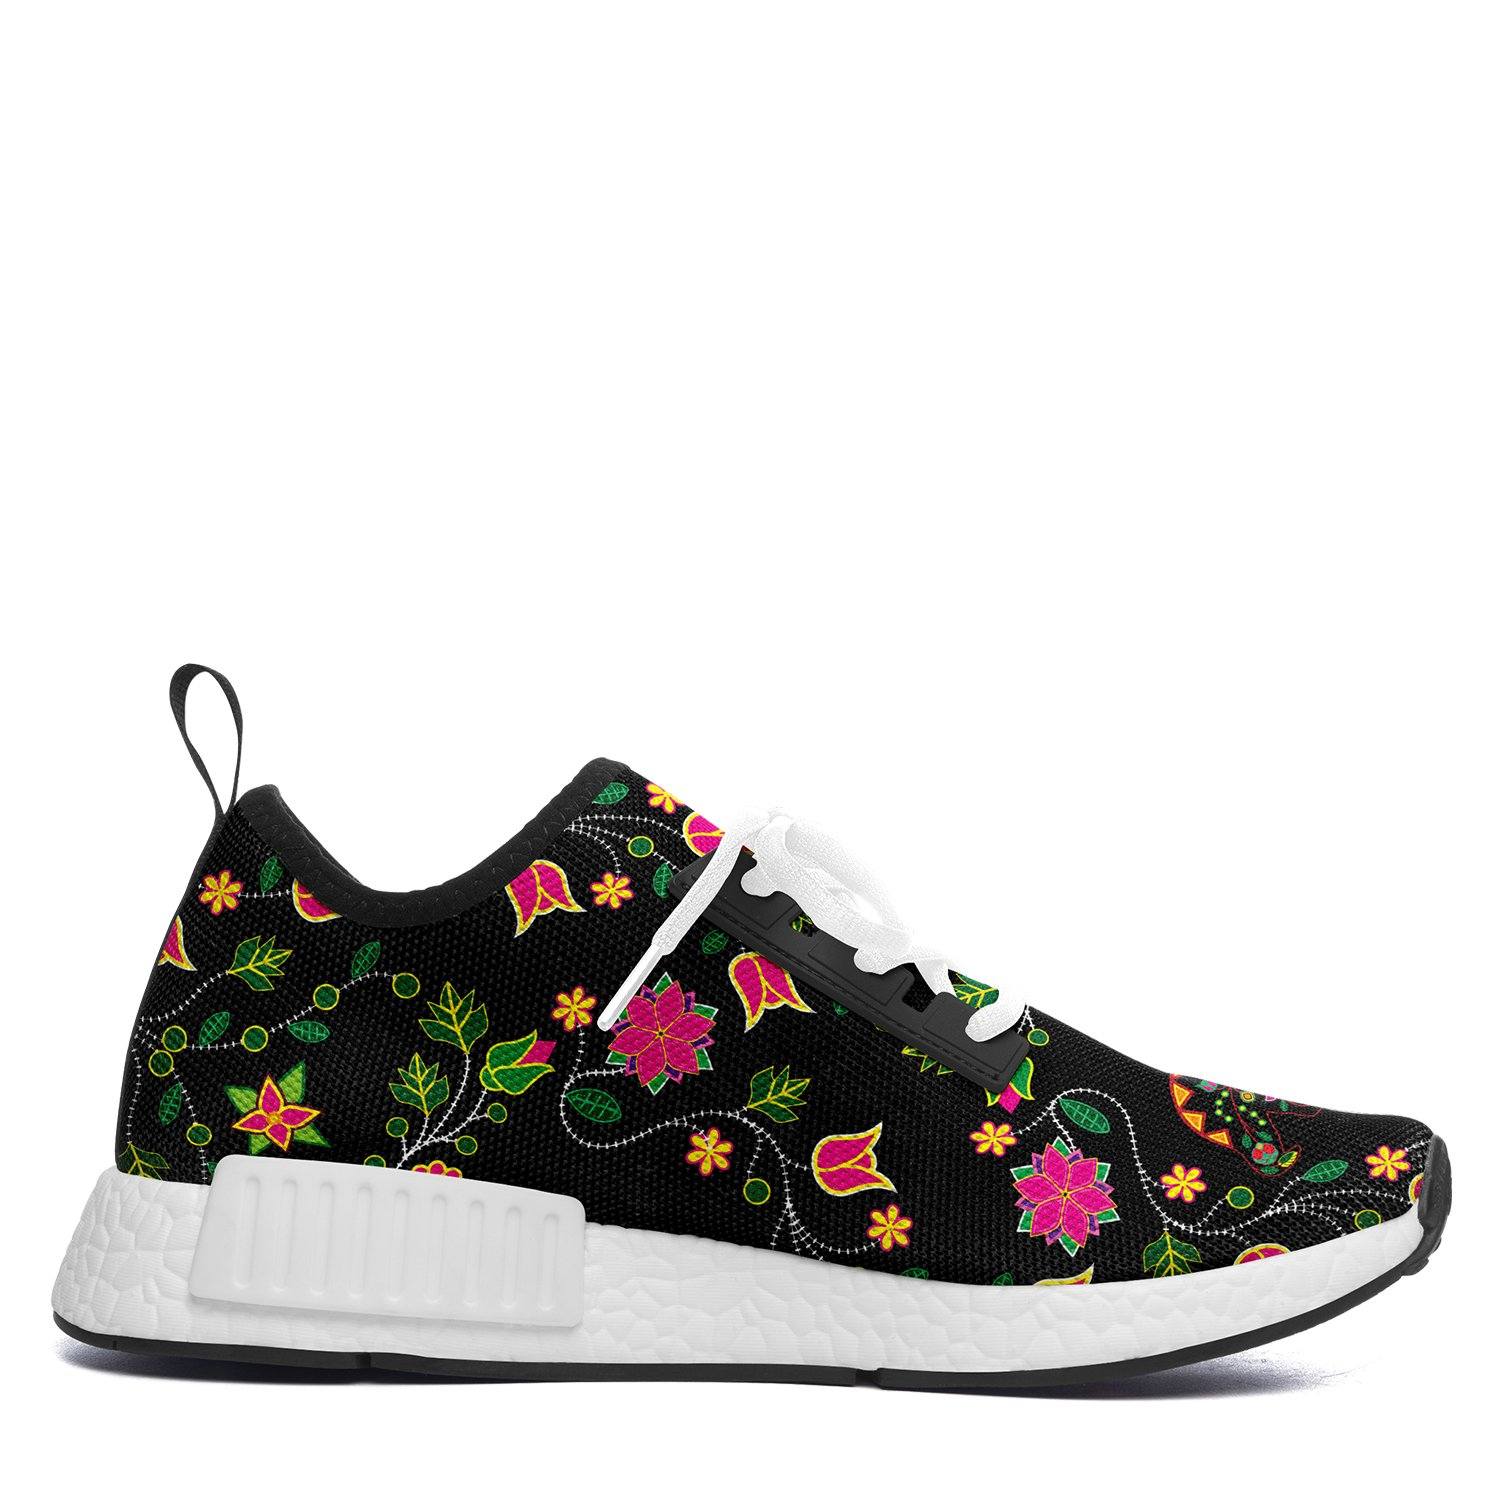 Floral Bear Draco Running Shoes 49 Dzine 